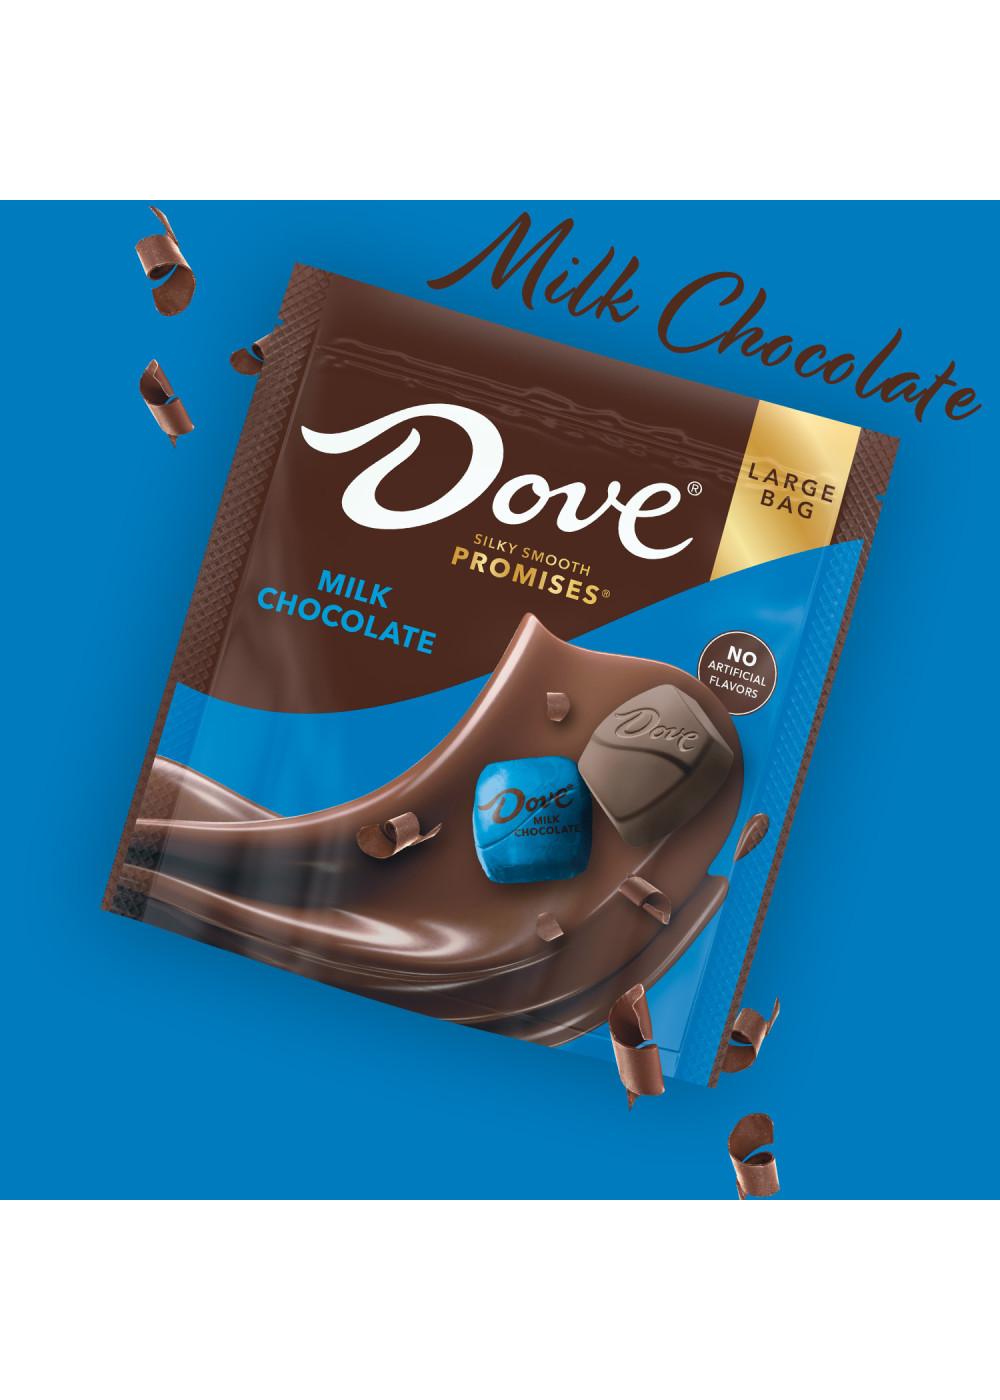 Dove Promises Milk Chocolate Candy - Large Bag; image 6 of 7